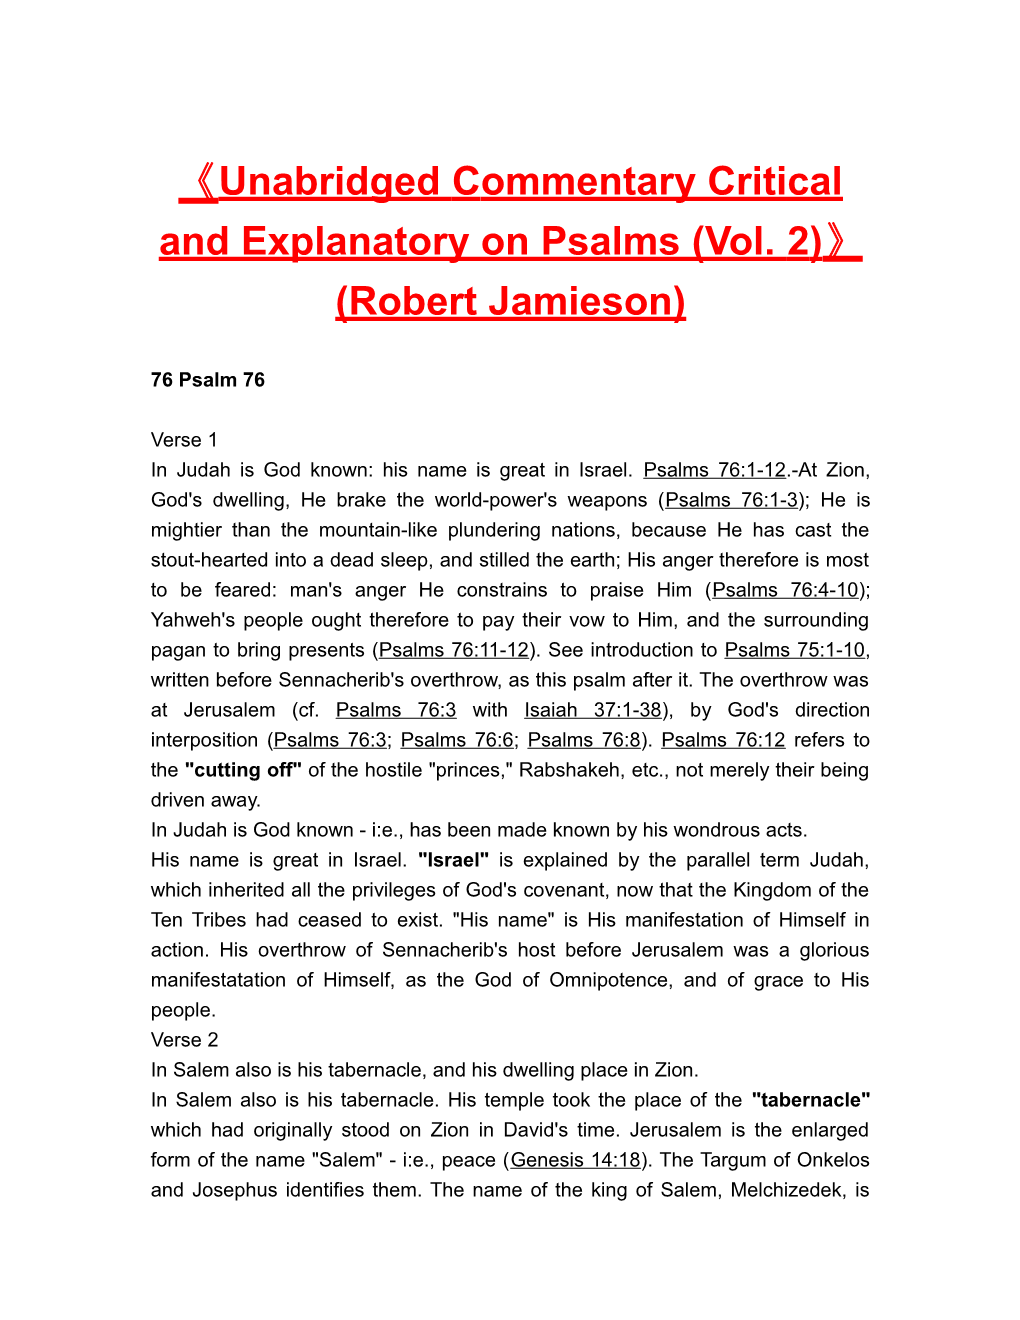 Unabridged Commentary Critical and Explanatory on Psalms (Vol. 2) (Robert Jamieson)